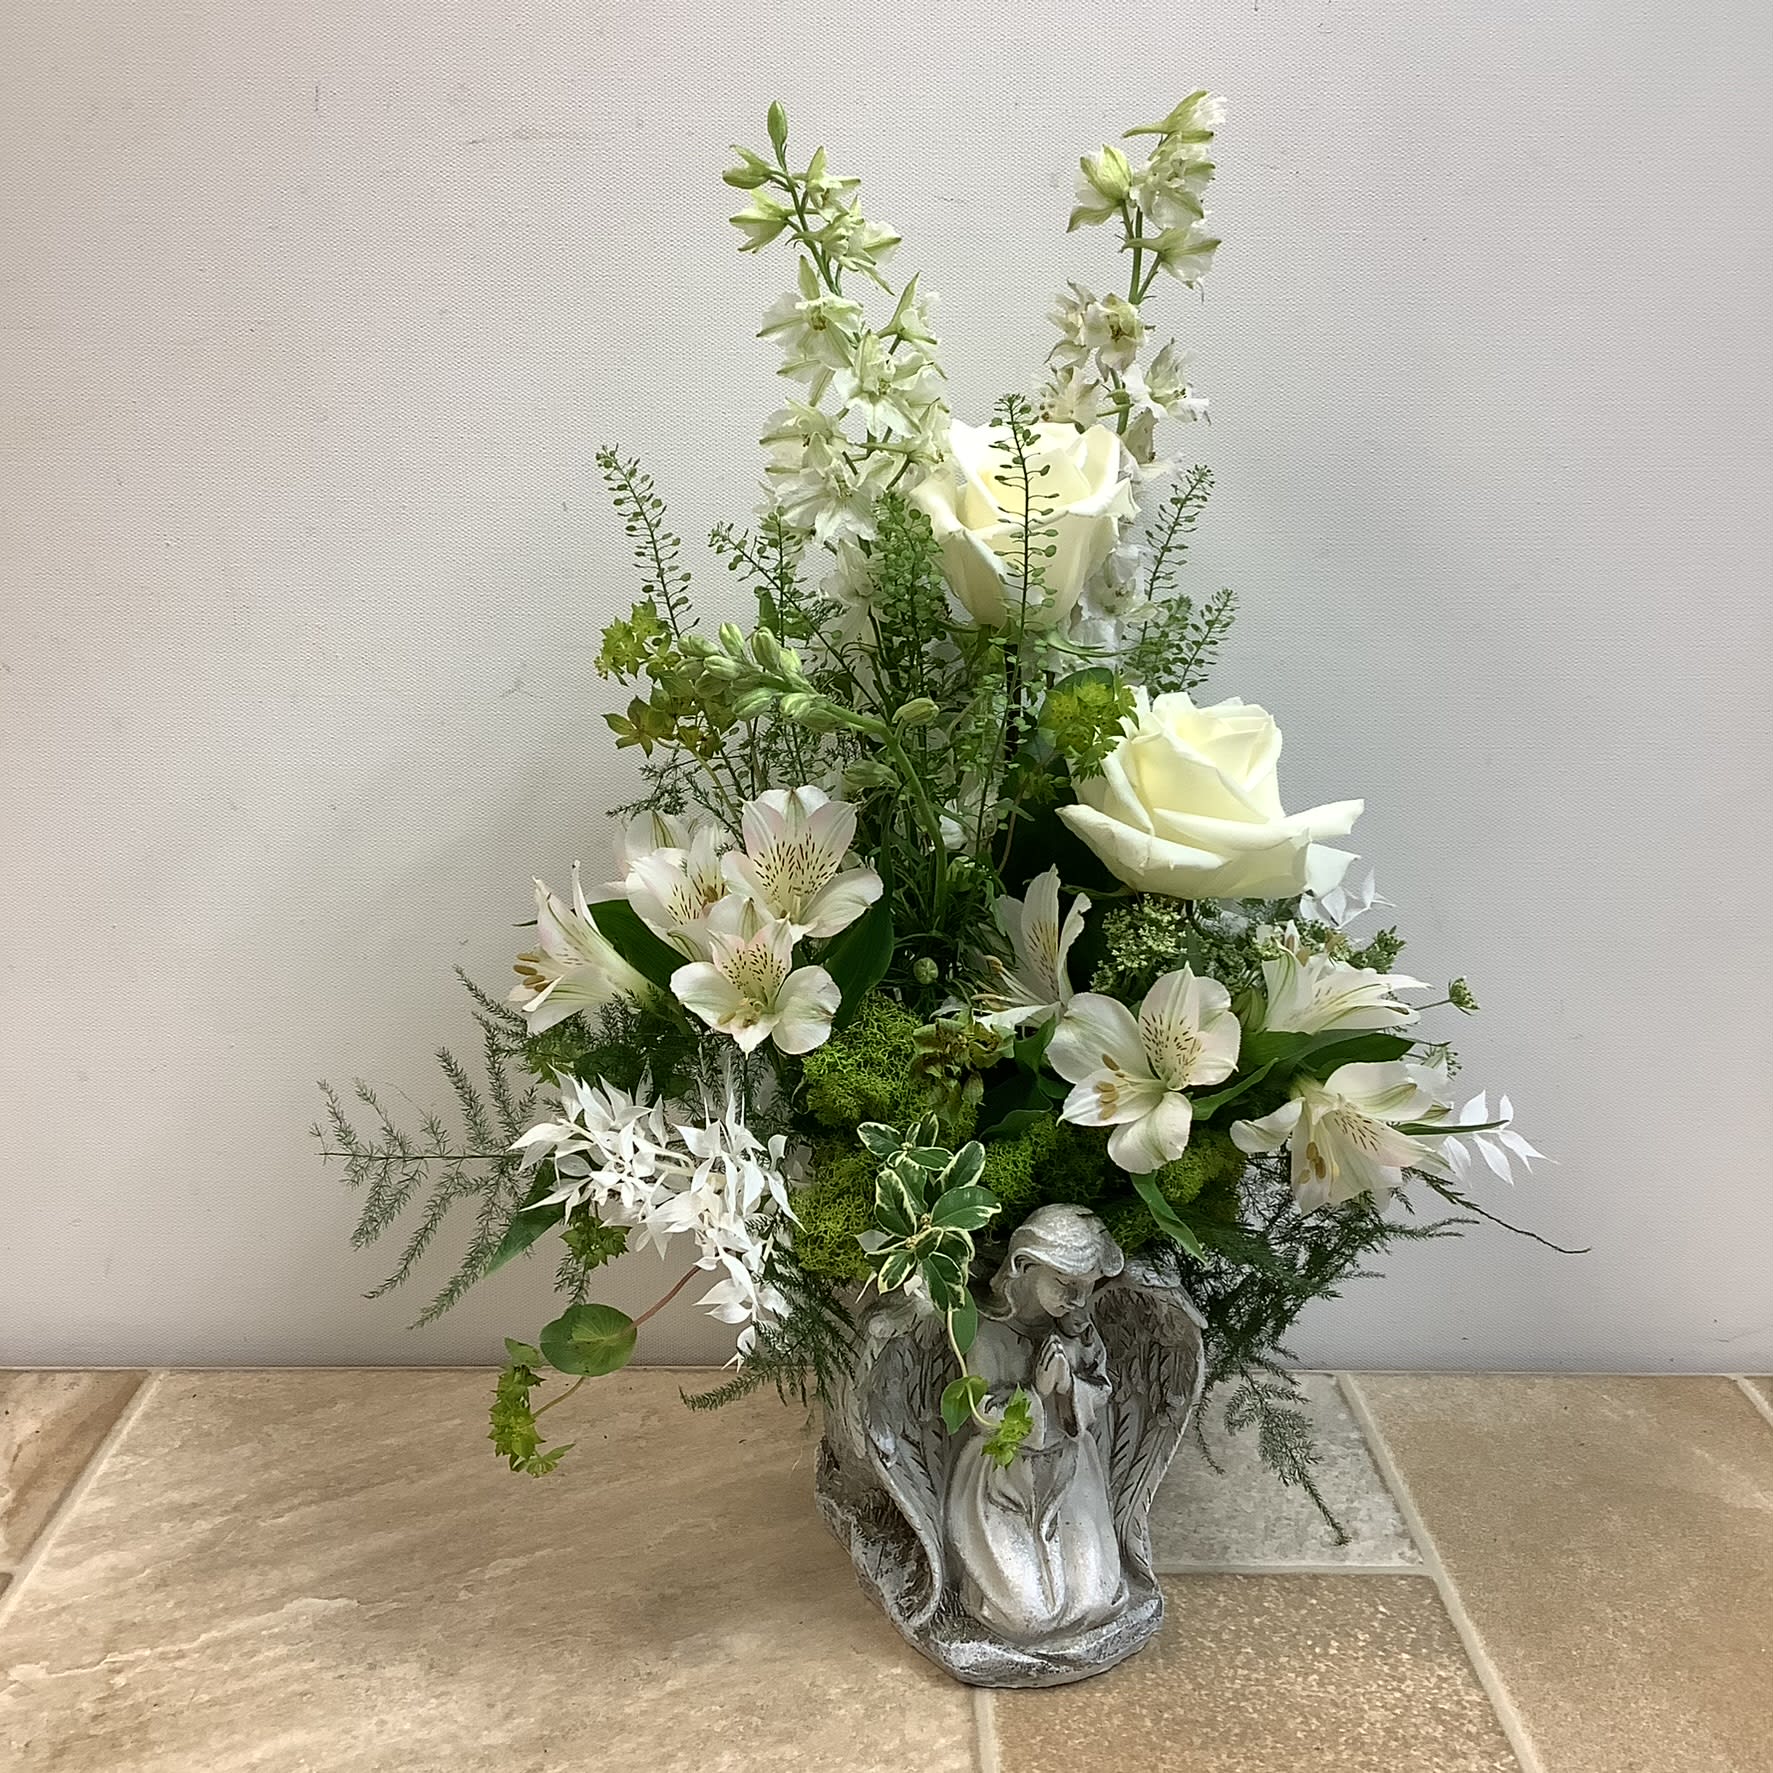 Enduring Beauty - A memorable bouquet designed in a lovely resin angel vase. It’s filled with a collection of all white fresh flowers including roses, alstroemerias and larkspur. It measures 14” wide x 17” tall